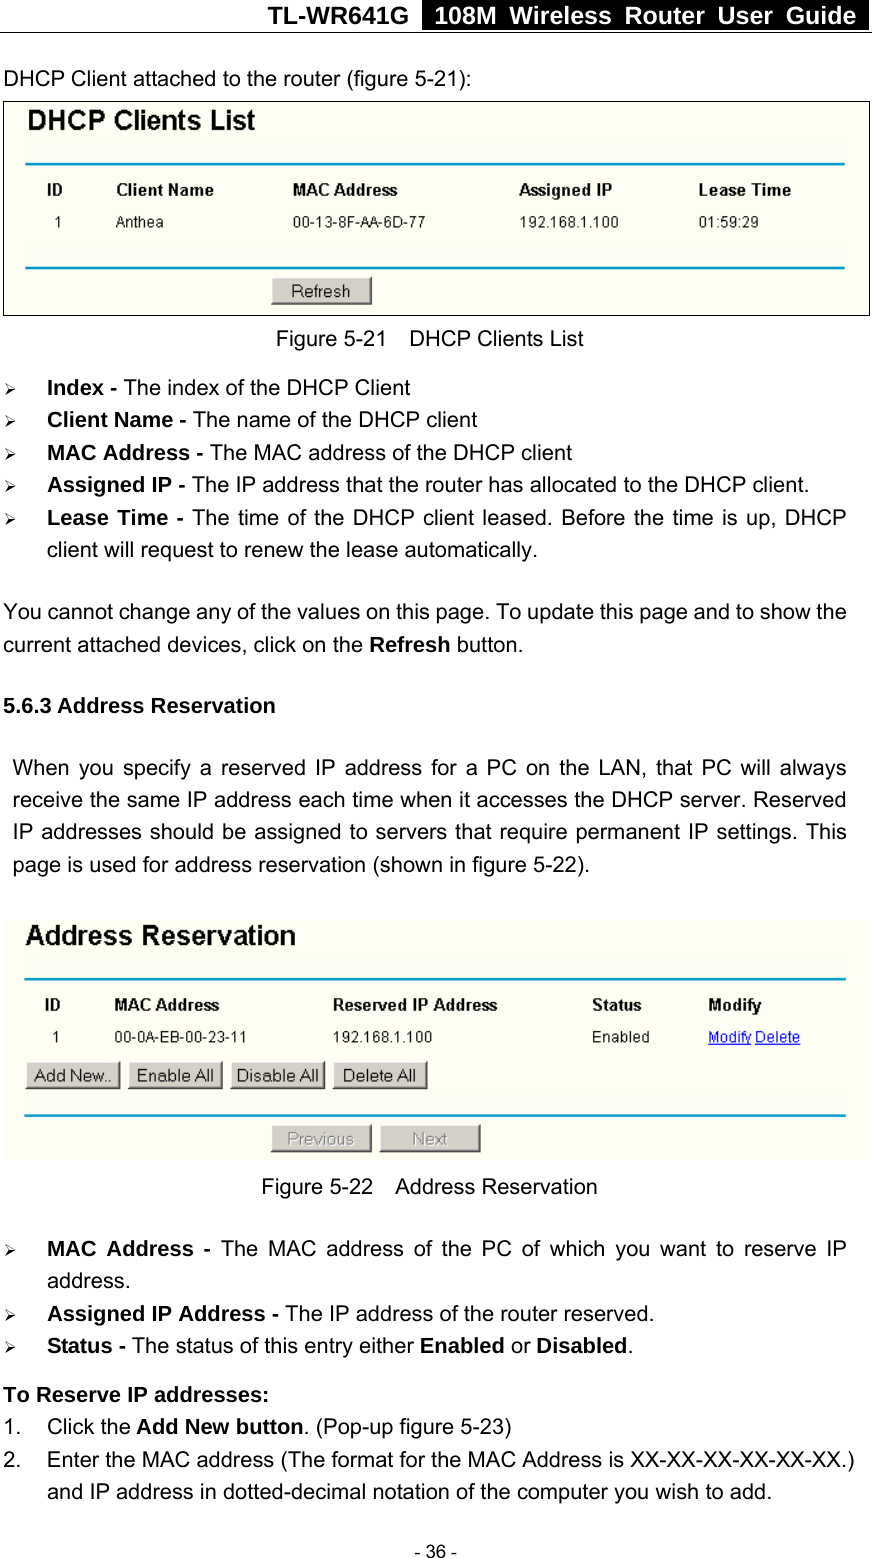 TL-WR641G   108M Wireless Router User Guide  DHCP Client attached to the router (figure 5-21):  Figure 5-21    DHCP Clients List ¾ Index - The index of the DHCP Client   ¾ Client Name - The name of the DHCP client   ¾ MAC Address - The MAC address of the DHCP client   ¾ Assigned IP - The IP address that the router has allocated to the DHCP client. ¾ Lease Time - The time of the DHCP client leased. Before the time is up, DHCP client will request to renew the lease automatically. You cannot change any of the values on this page. To update this page and to show the current attached devices, click on the Refresh button. 5.6.3 Address Reservation When you specify a reserved IP address for a PC on the LAN, that PC will always receive the same IP address each time when it accesses the DHCP server. Reserved IP addresses should be assigned to servers that require permanent IP settings. This page is used for address reservation (shown in figure 5-22).  Figure 5-22  Address Reservation ¾ MAC Address - The MAC address of the PC of which you want to reserve IP address. ¾ Assigned IP Address - The IP address of the router reserved. ¾ Status - The status of this entry either Enabled or Disabled. To Reserve IP addresses:  1. Click the Add New button. (Pop-up figure 5-23) 2.  Enter the MAC address (The format for the MAC Address is XX-XX-XX-XX-XX-XX.) and IP address in dotted-decimal notation of the computer you wish to add.    - 36 - 